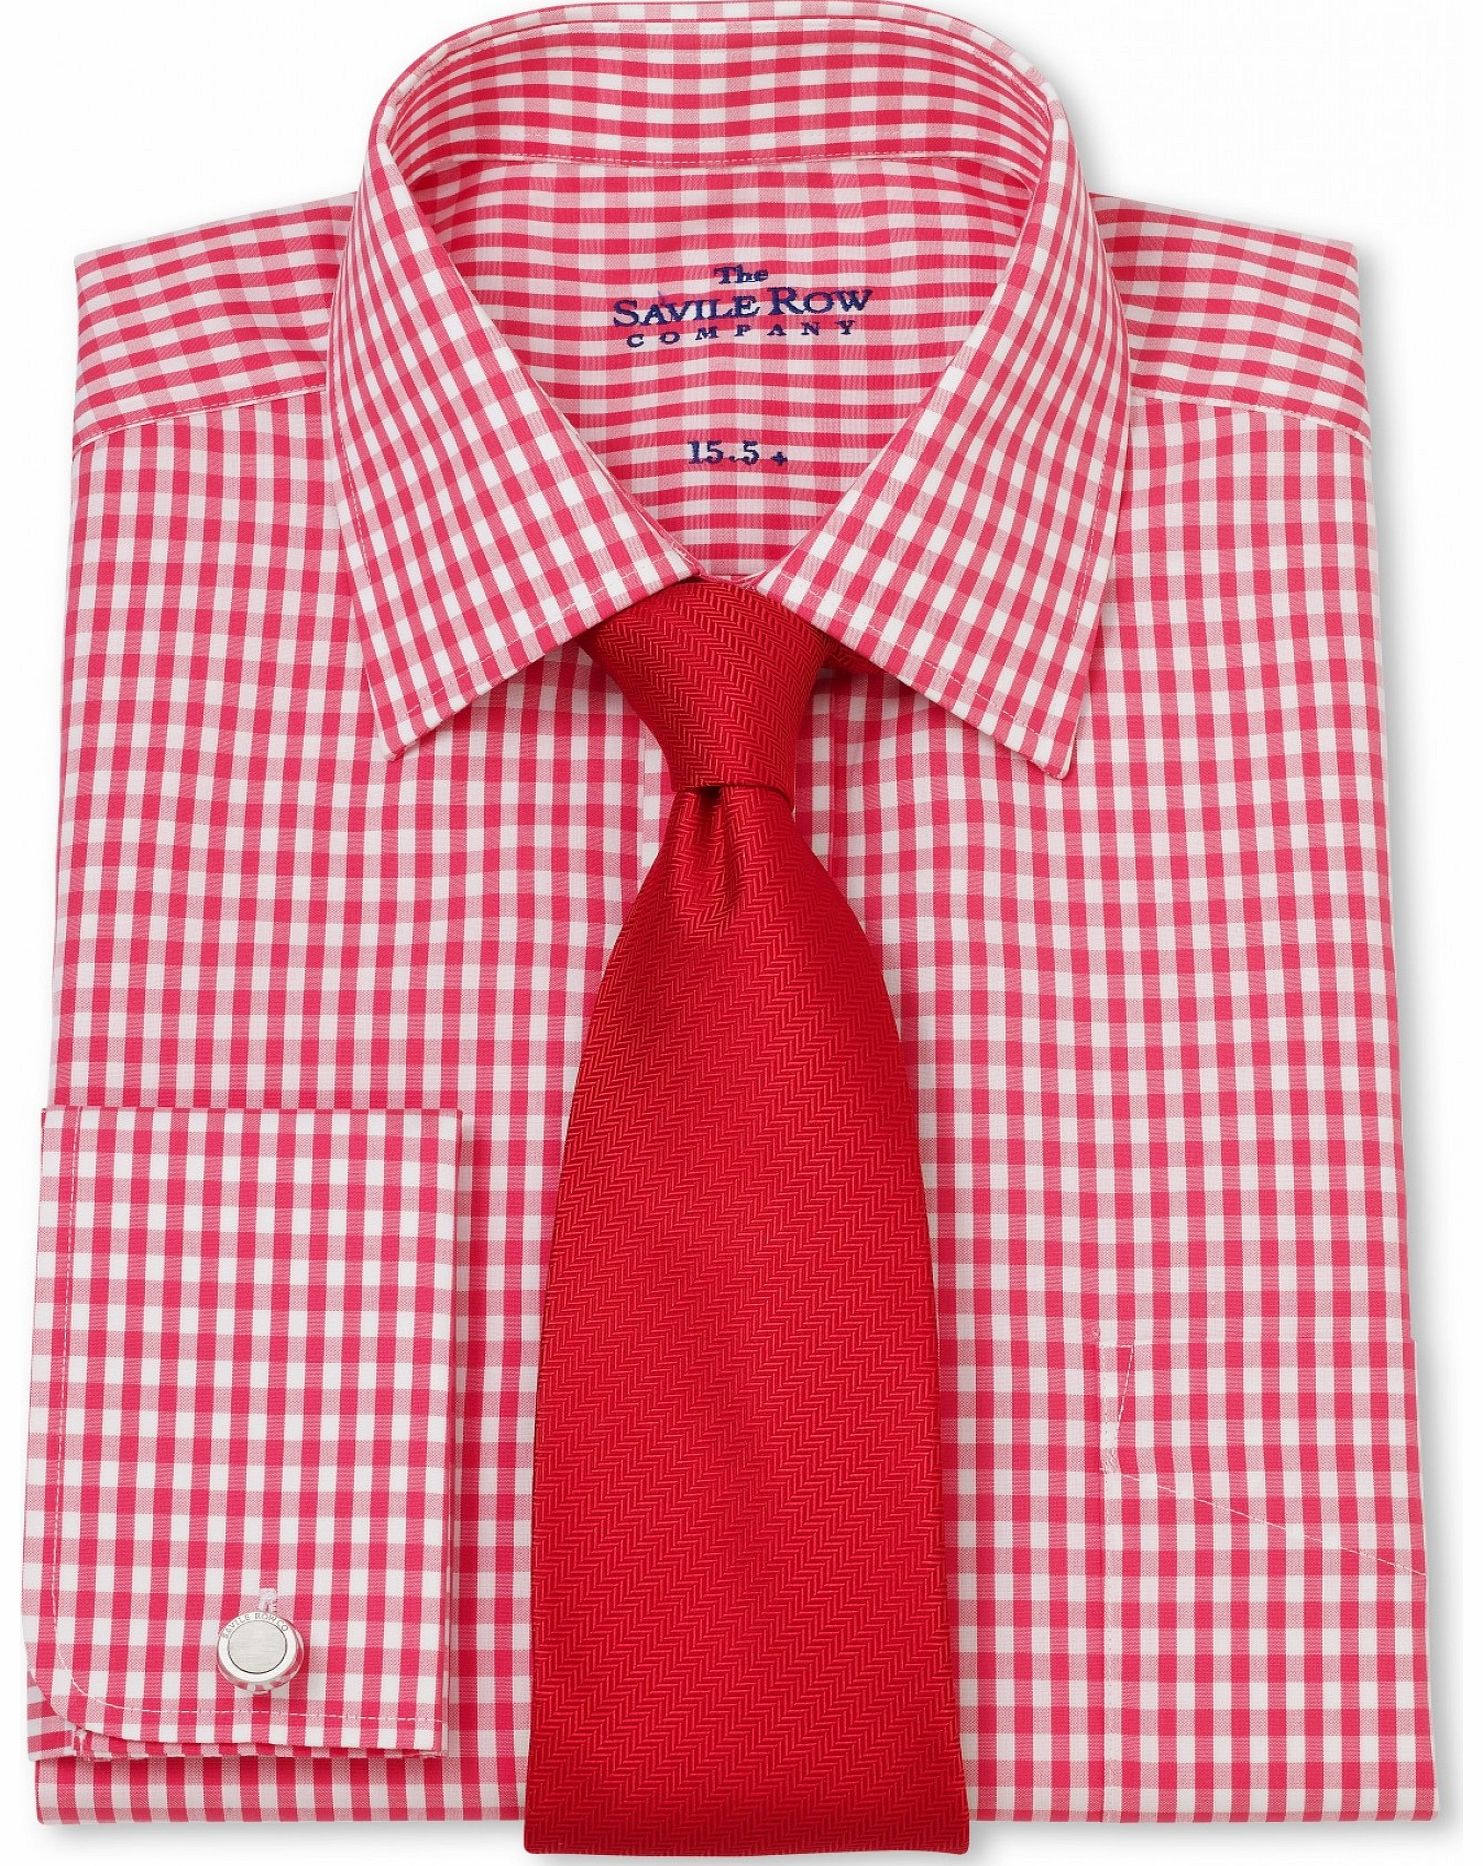 Savile Row Company Pink White Gingham Check Classic Fit Shirt 18``